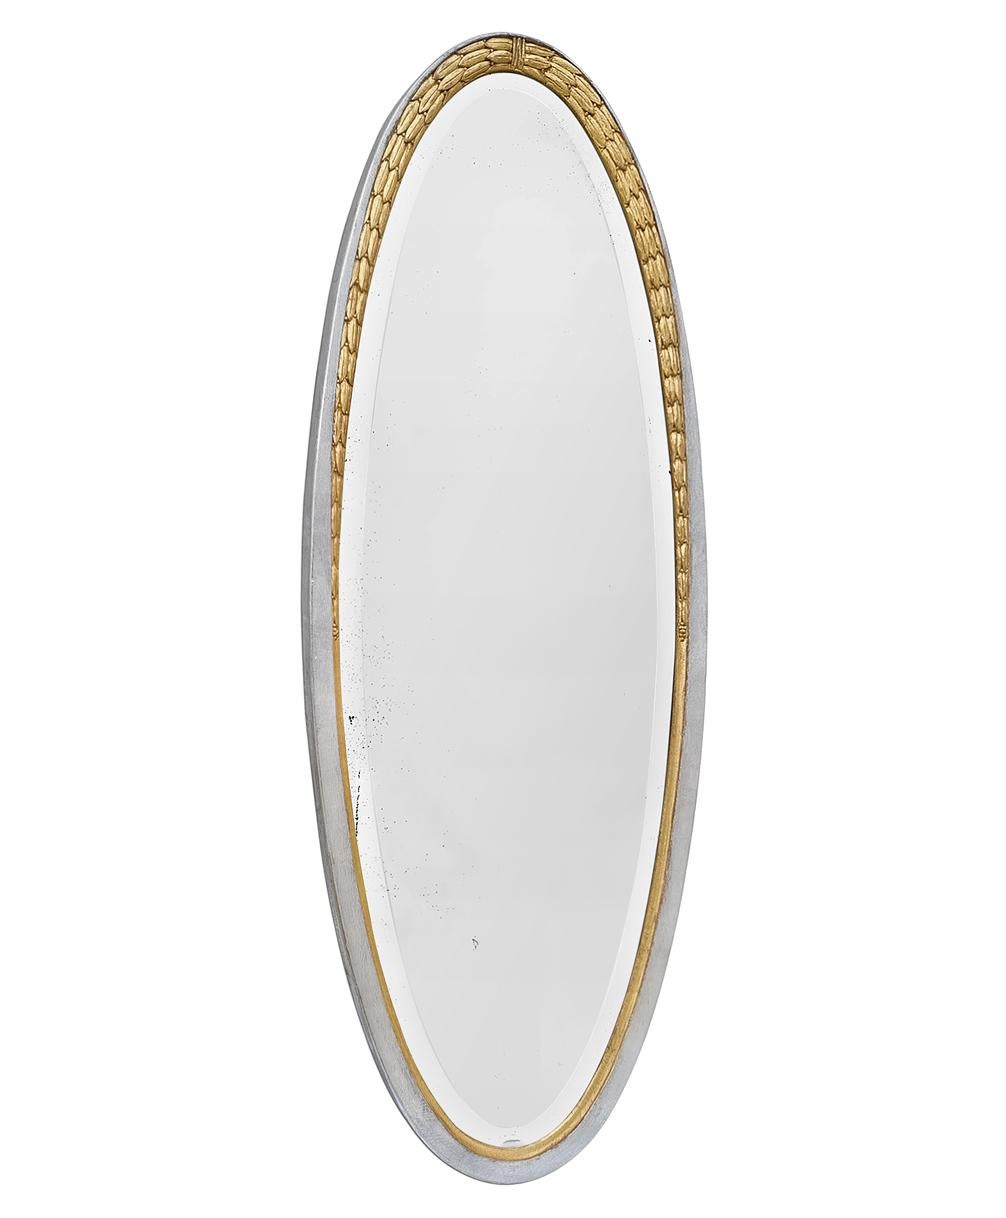 Very large French Art Deco oval mirror with laurel leaf decoration, dating from 1928. Beautiful antique oval frame in gilded and silvered carved wood (Re-gilding with leaf by Atelier RTCD Paris). Antique frame width:  5,5 cm / 2,16 in. Original